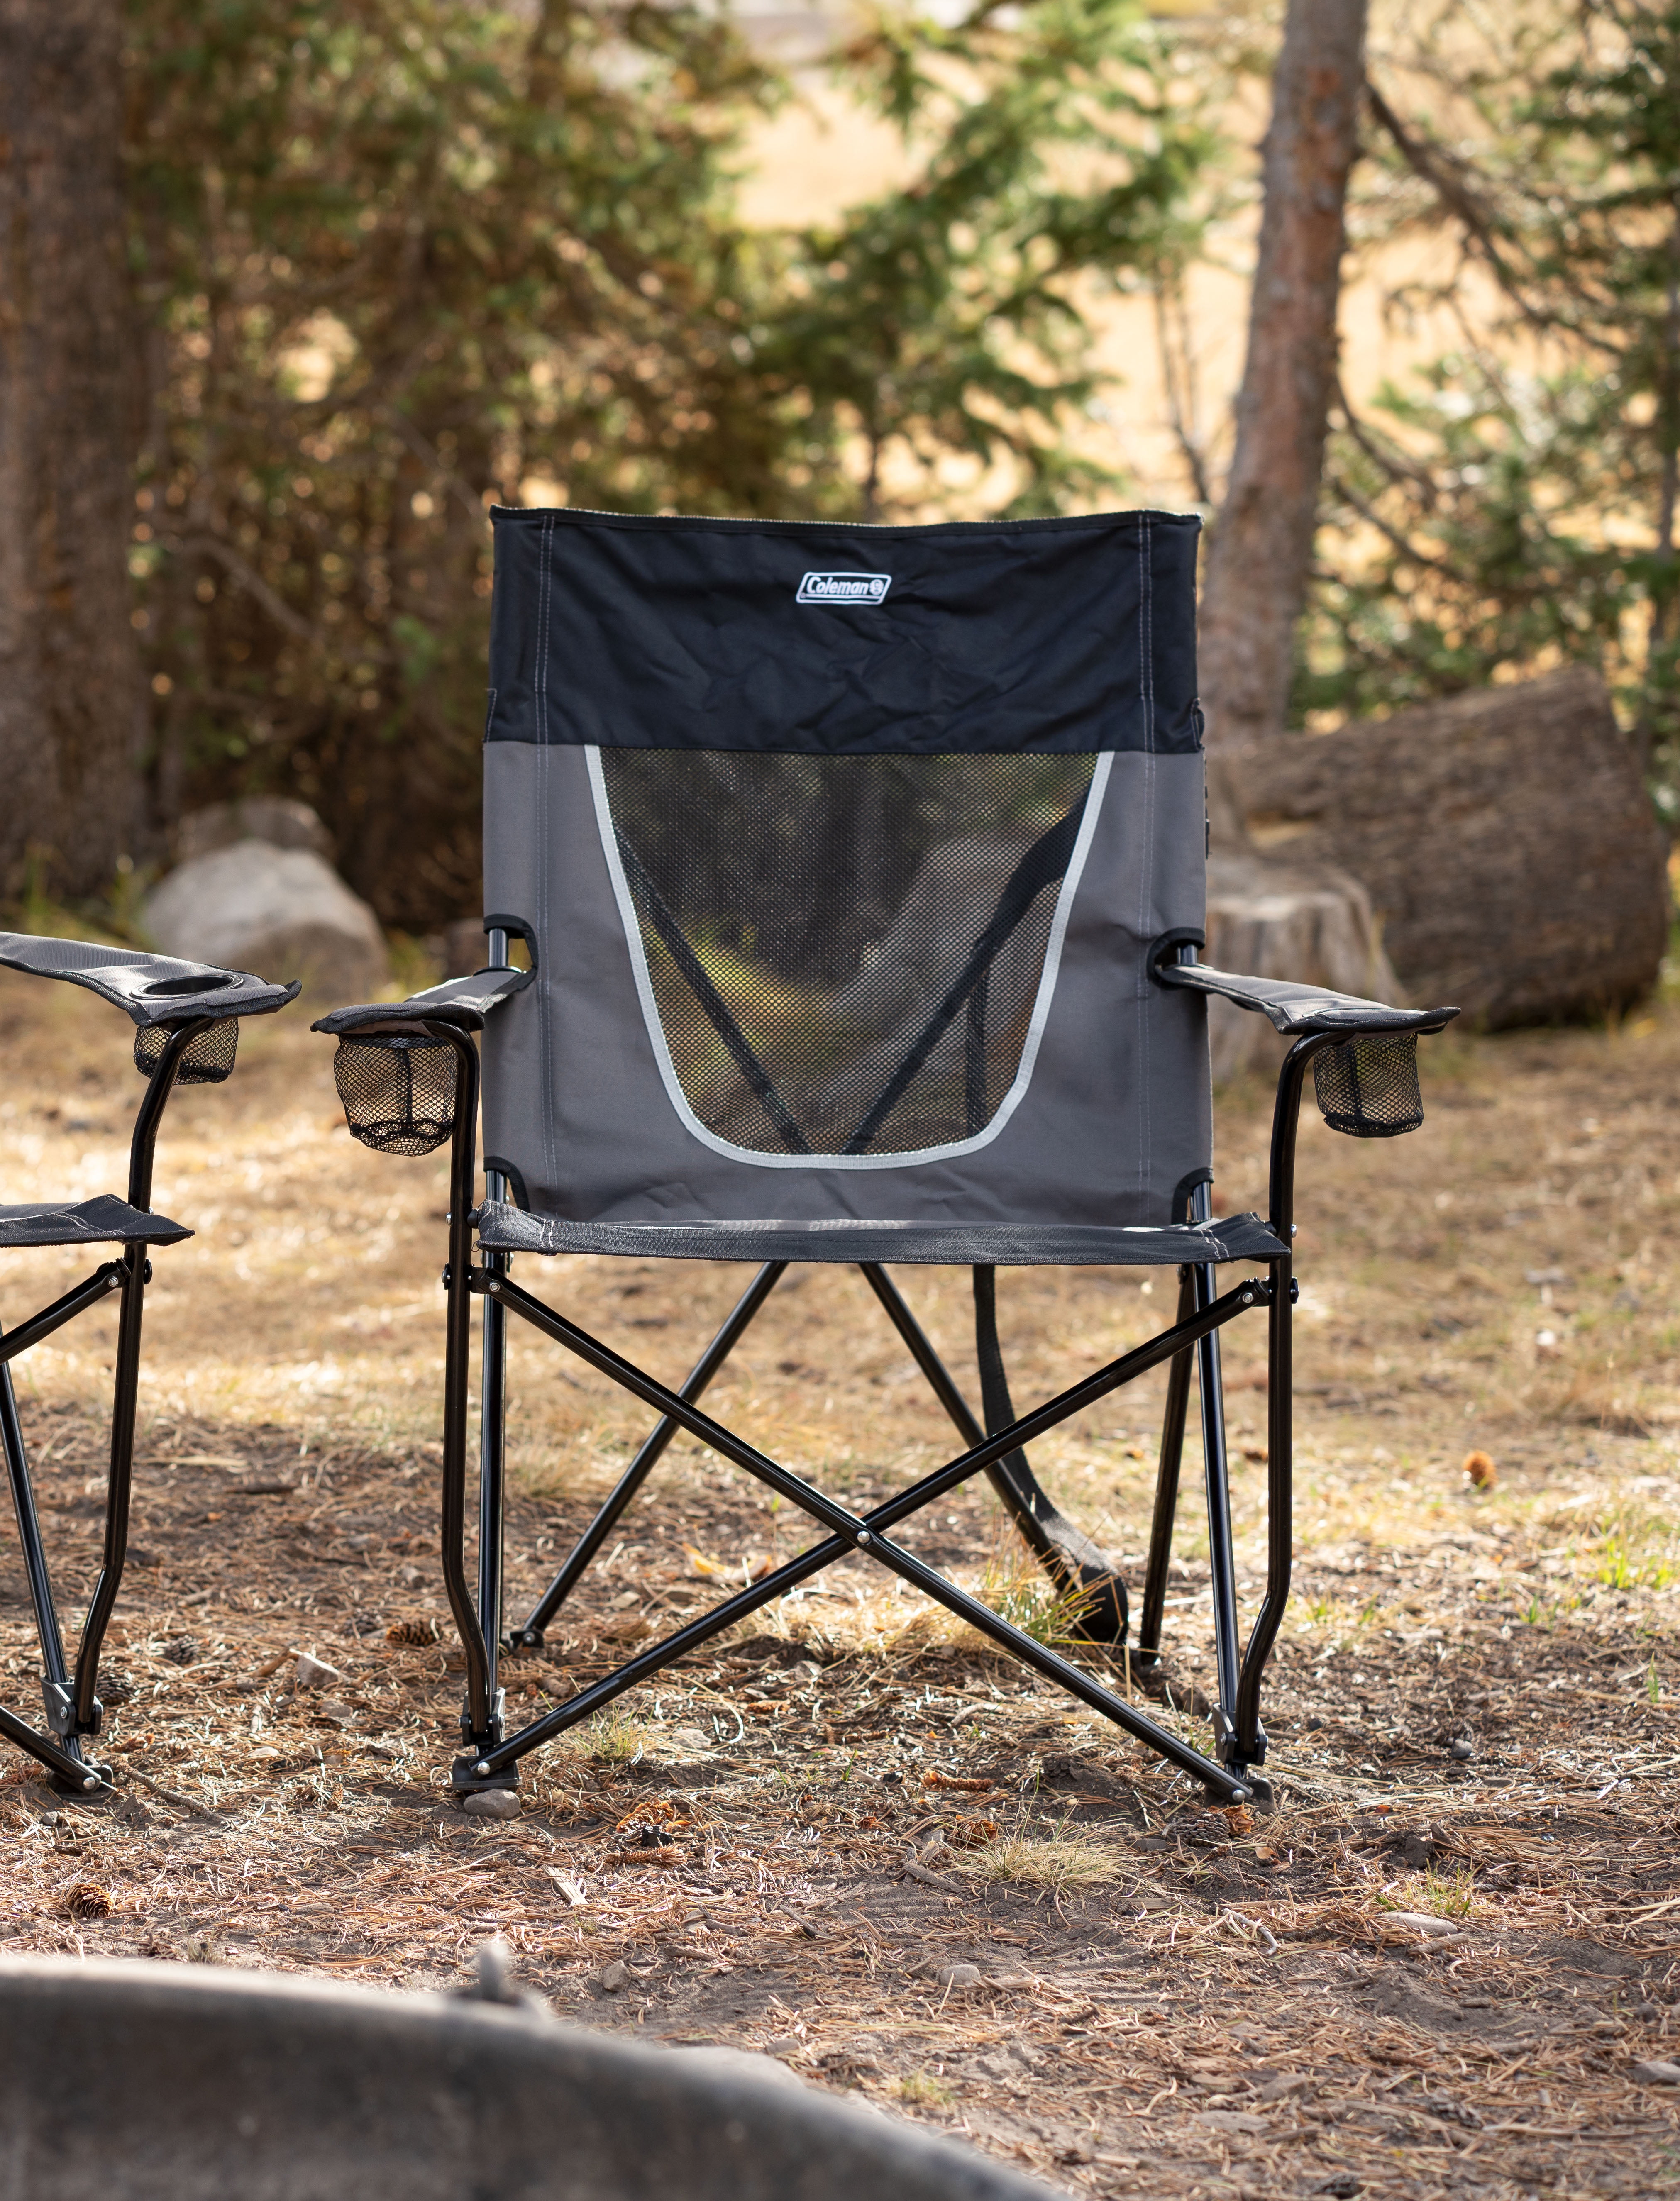 coleman ultimate comfort sling chair